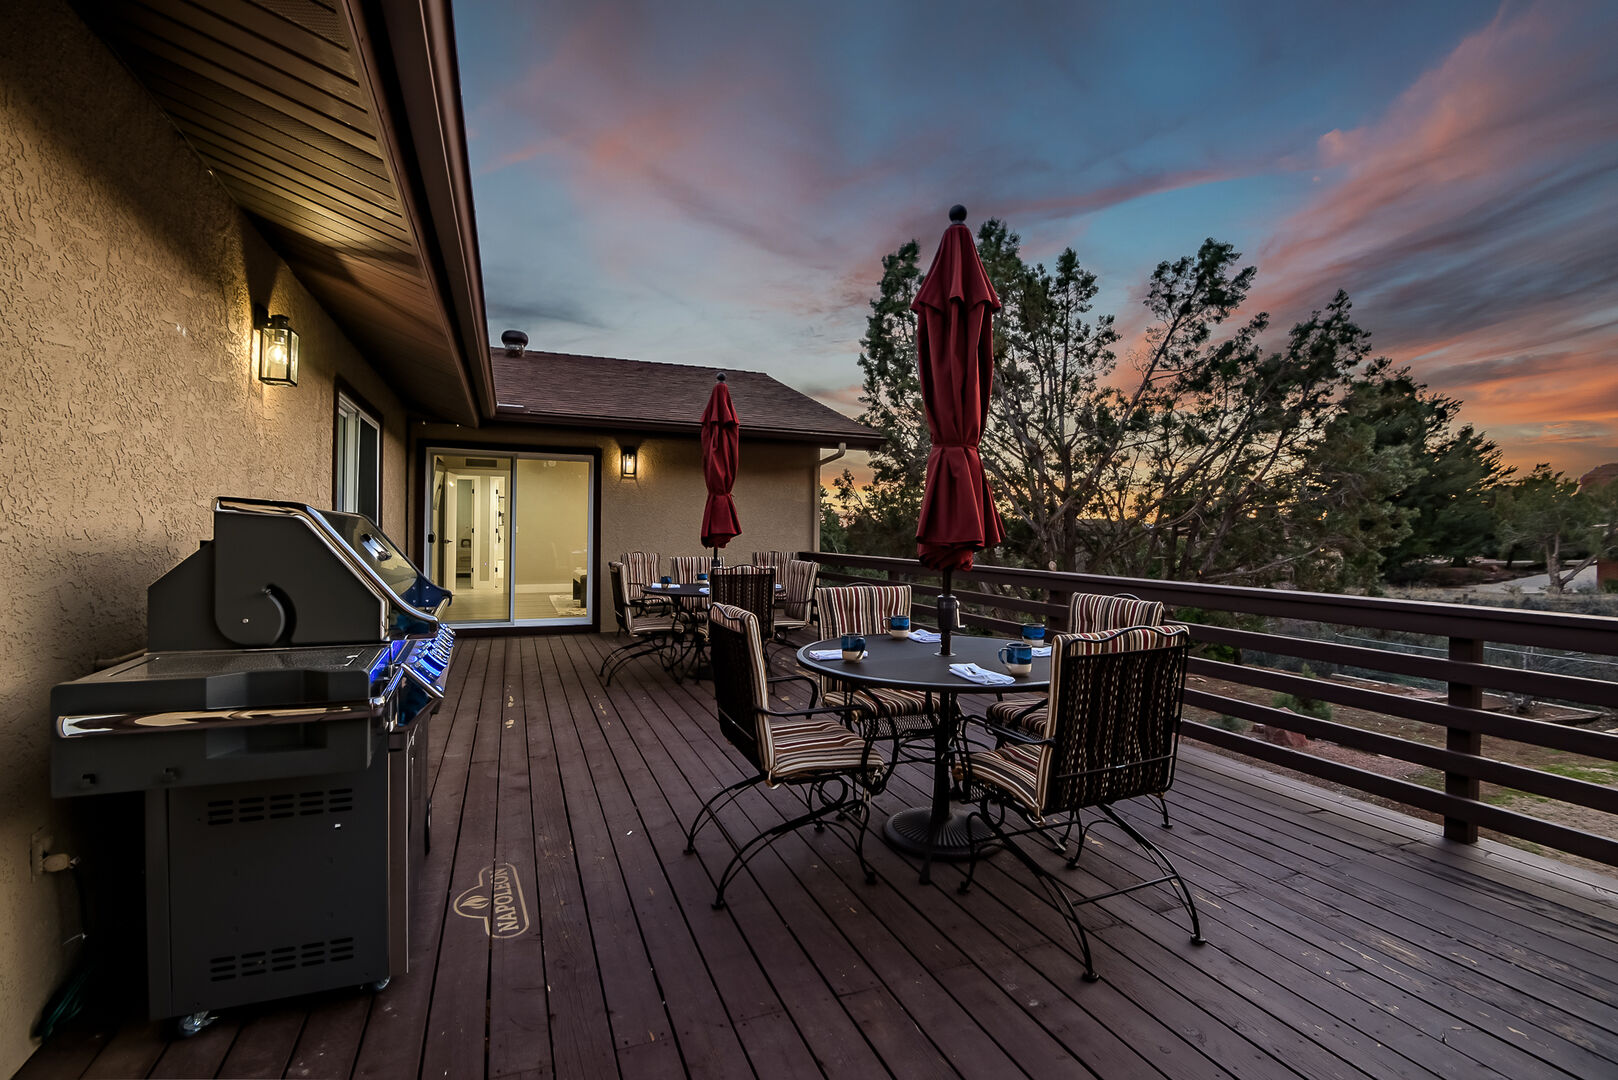 Patio deck offers plenty of seating to enjoy the direct red rock views and propane BBQ grill